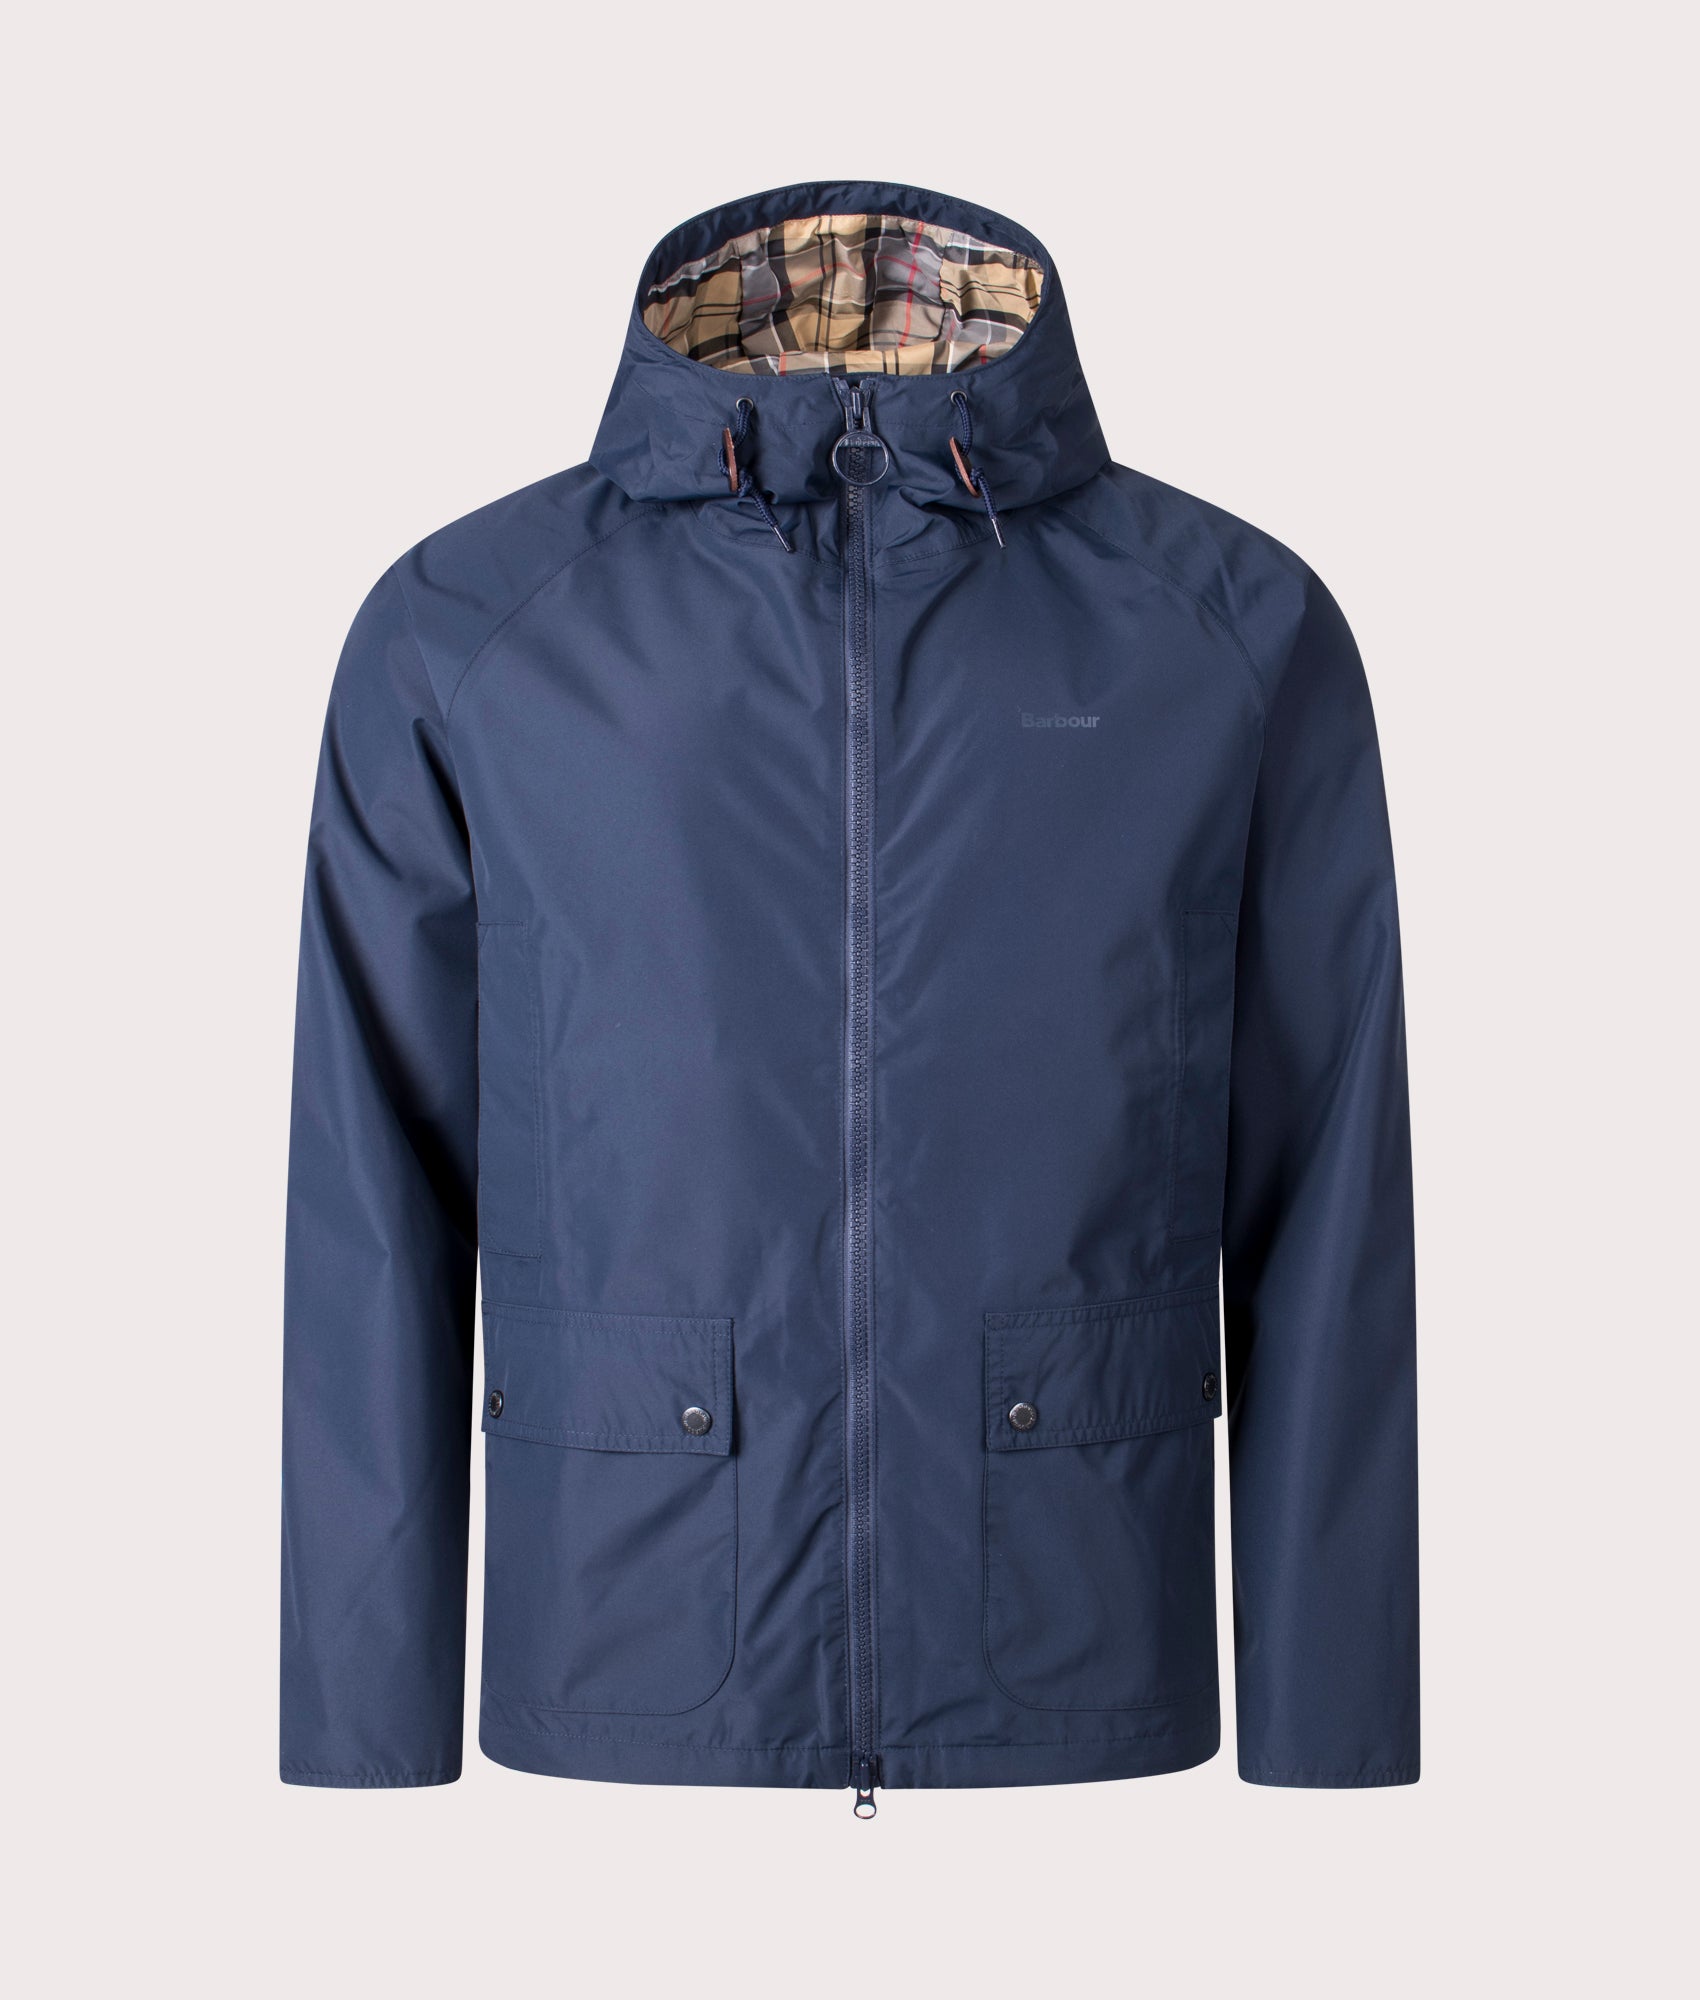 Barbour Lifestyle Mens Hooded Domus Jacket - Colour: NY73 Navy/Dress - Size: Large